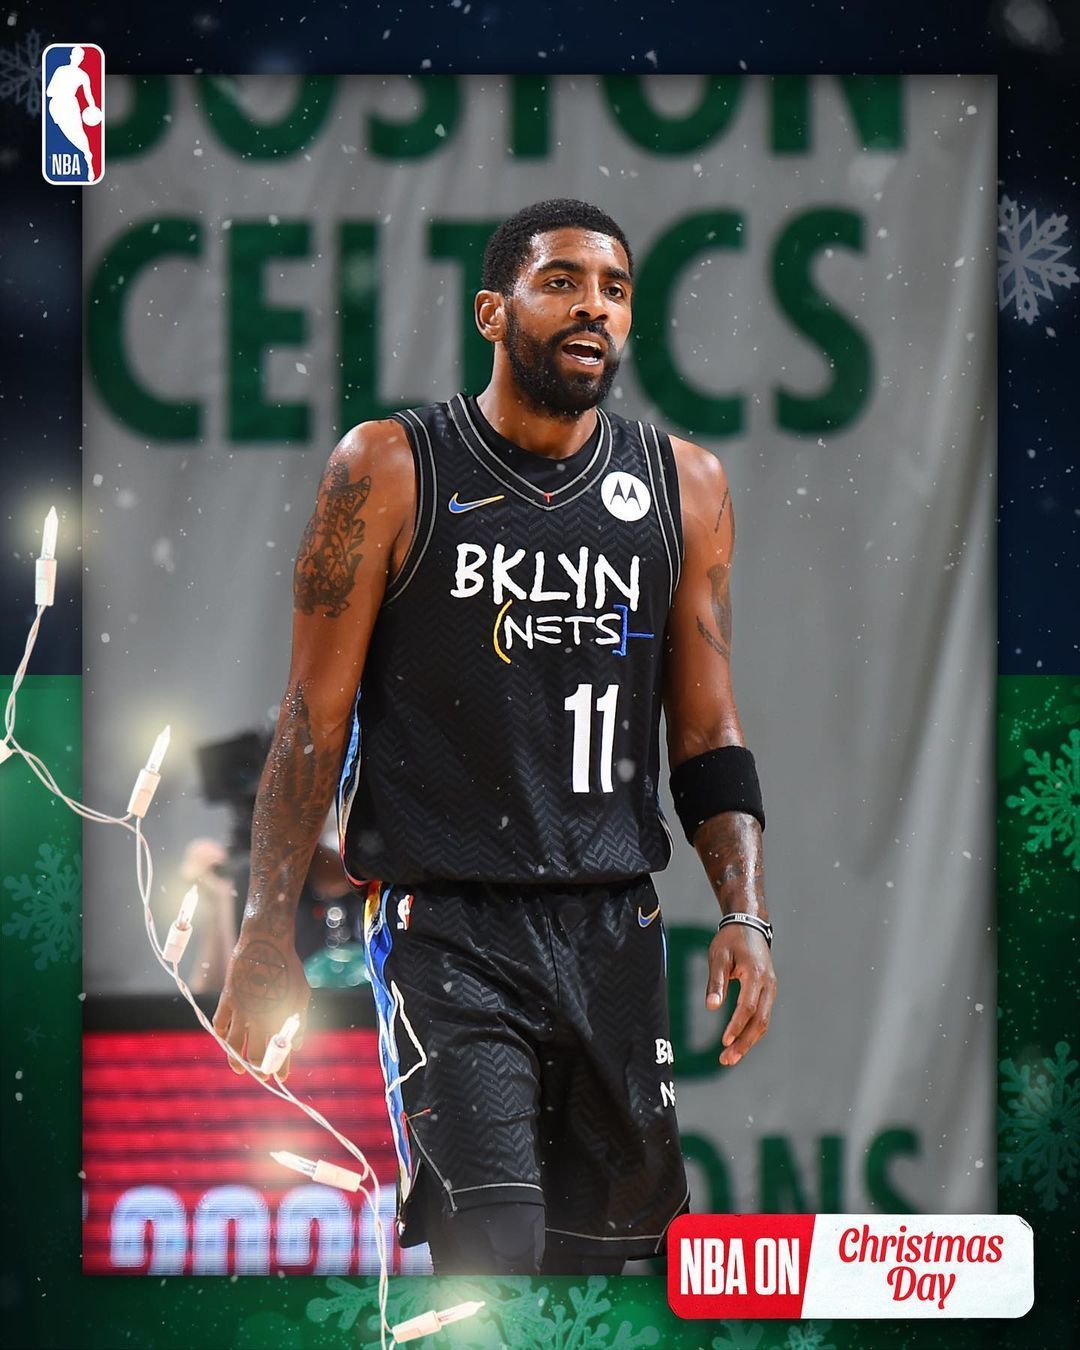 NBA Canada On Instagram: “Brooklyn Improves To 2 0 On The Season As They Top Boston On Christmas. Swipe ➡️ To See The Pics Of T. Nba Picture, Kyrie Irving, Nba